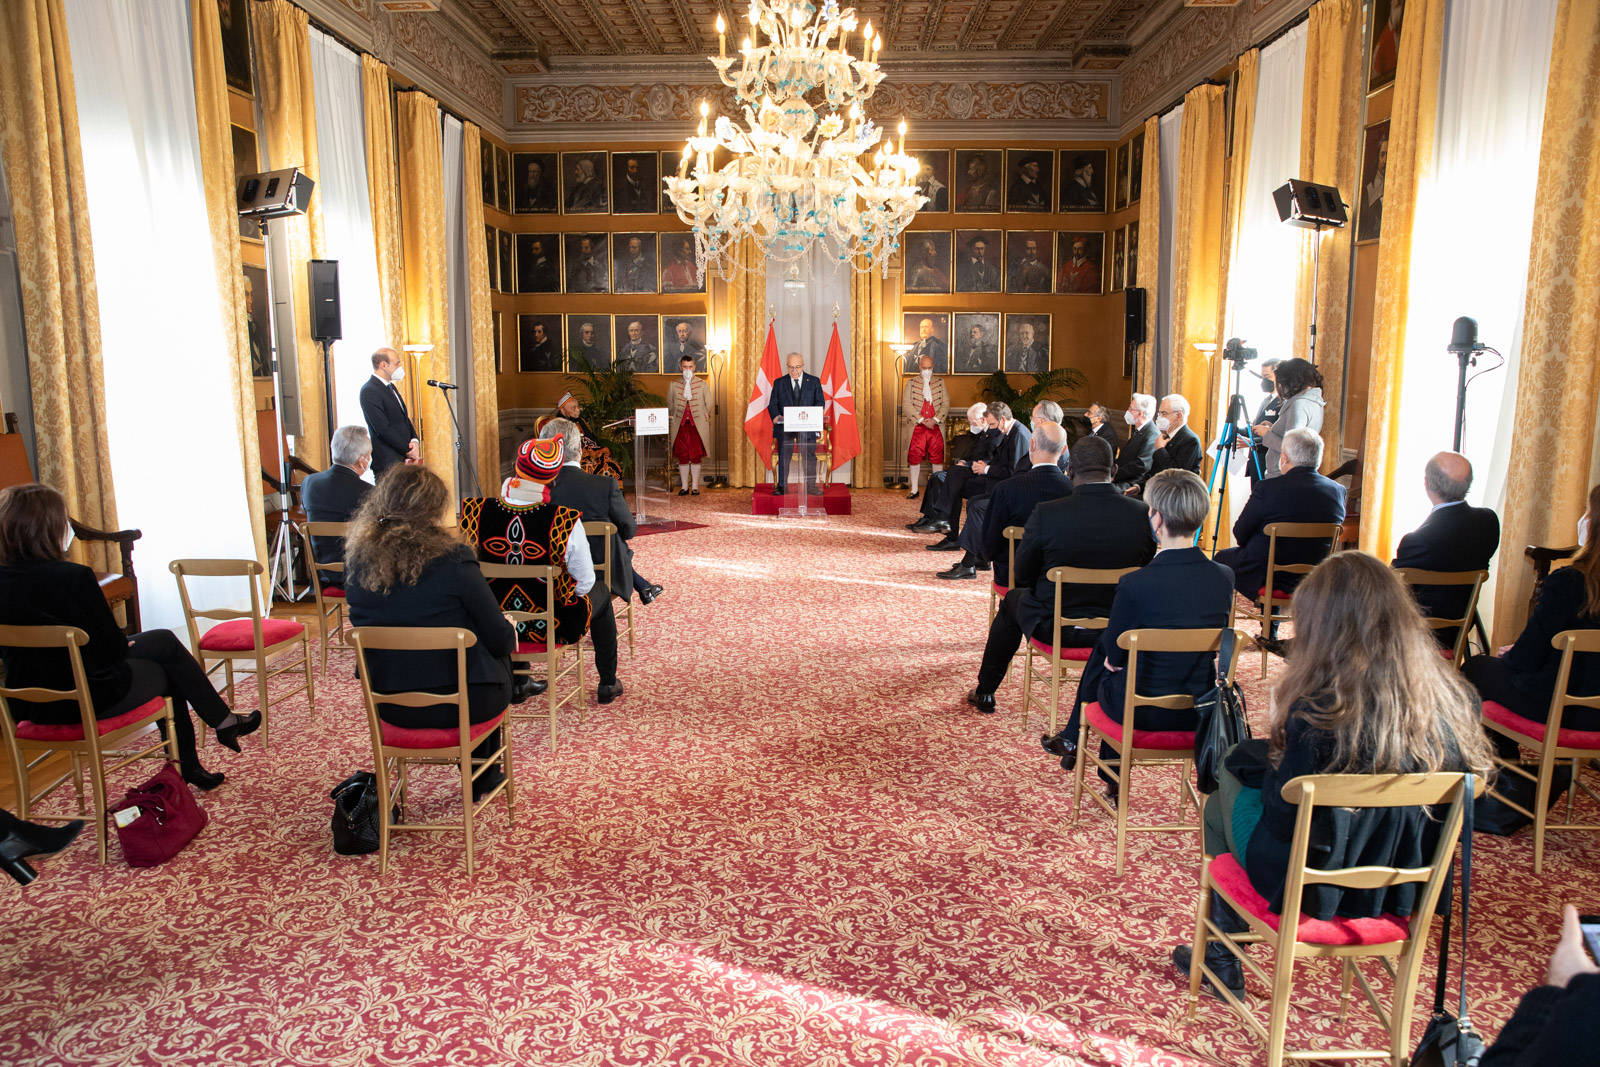 Speech by the Lieutenant of the Grand Master Fra’ Marco Luzzago to the Diplomatic Corps accredited to the Sovereign Order of Malta